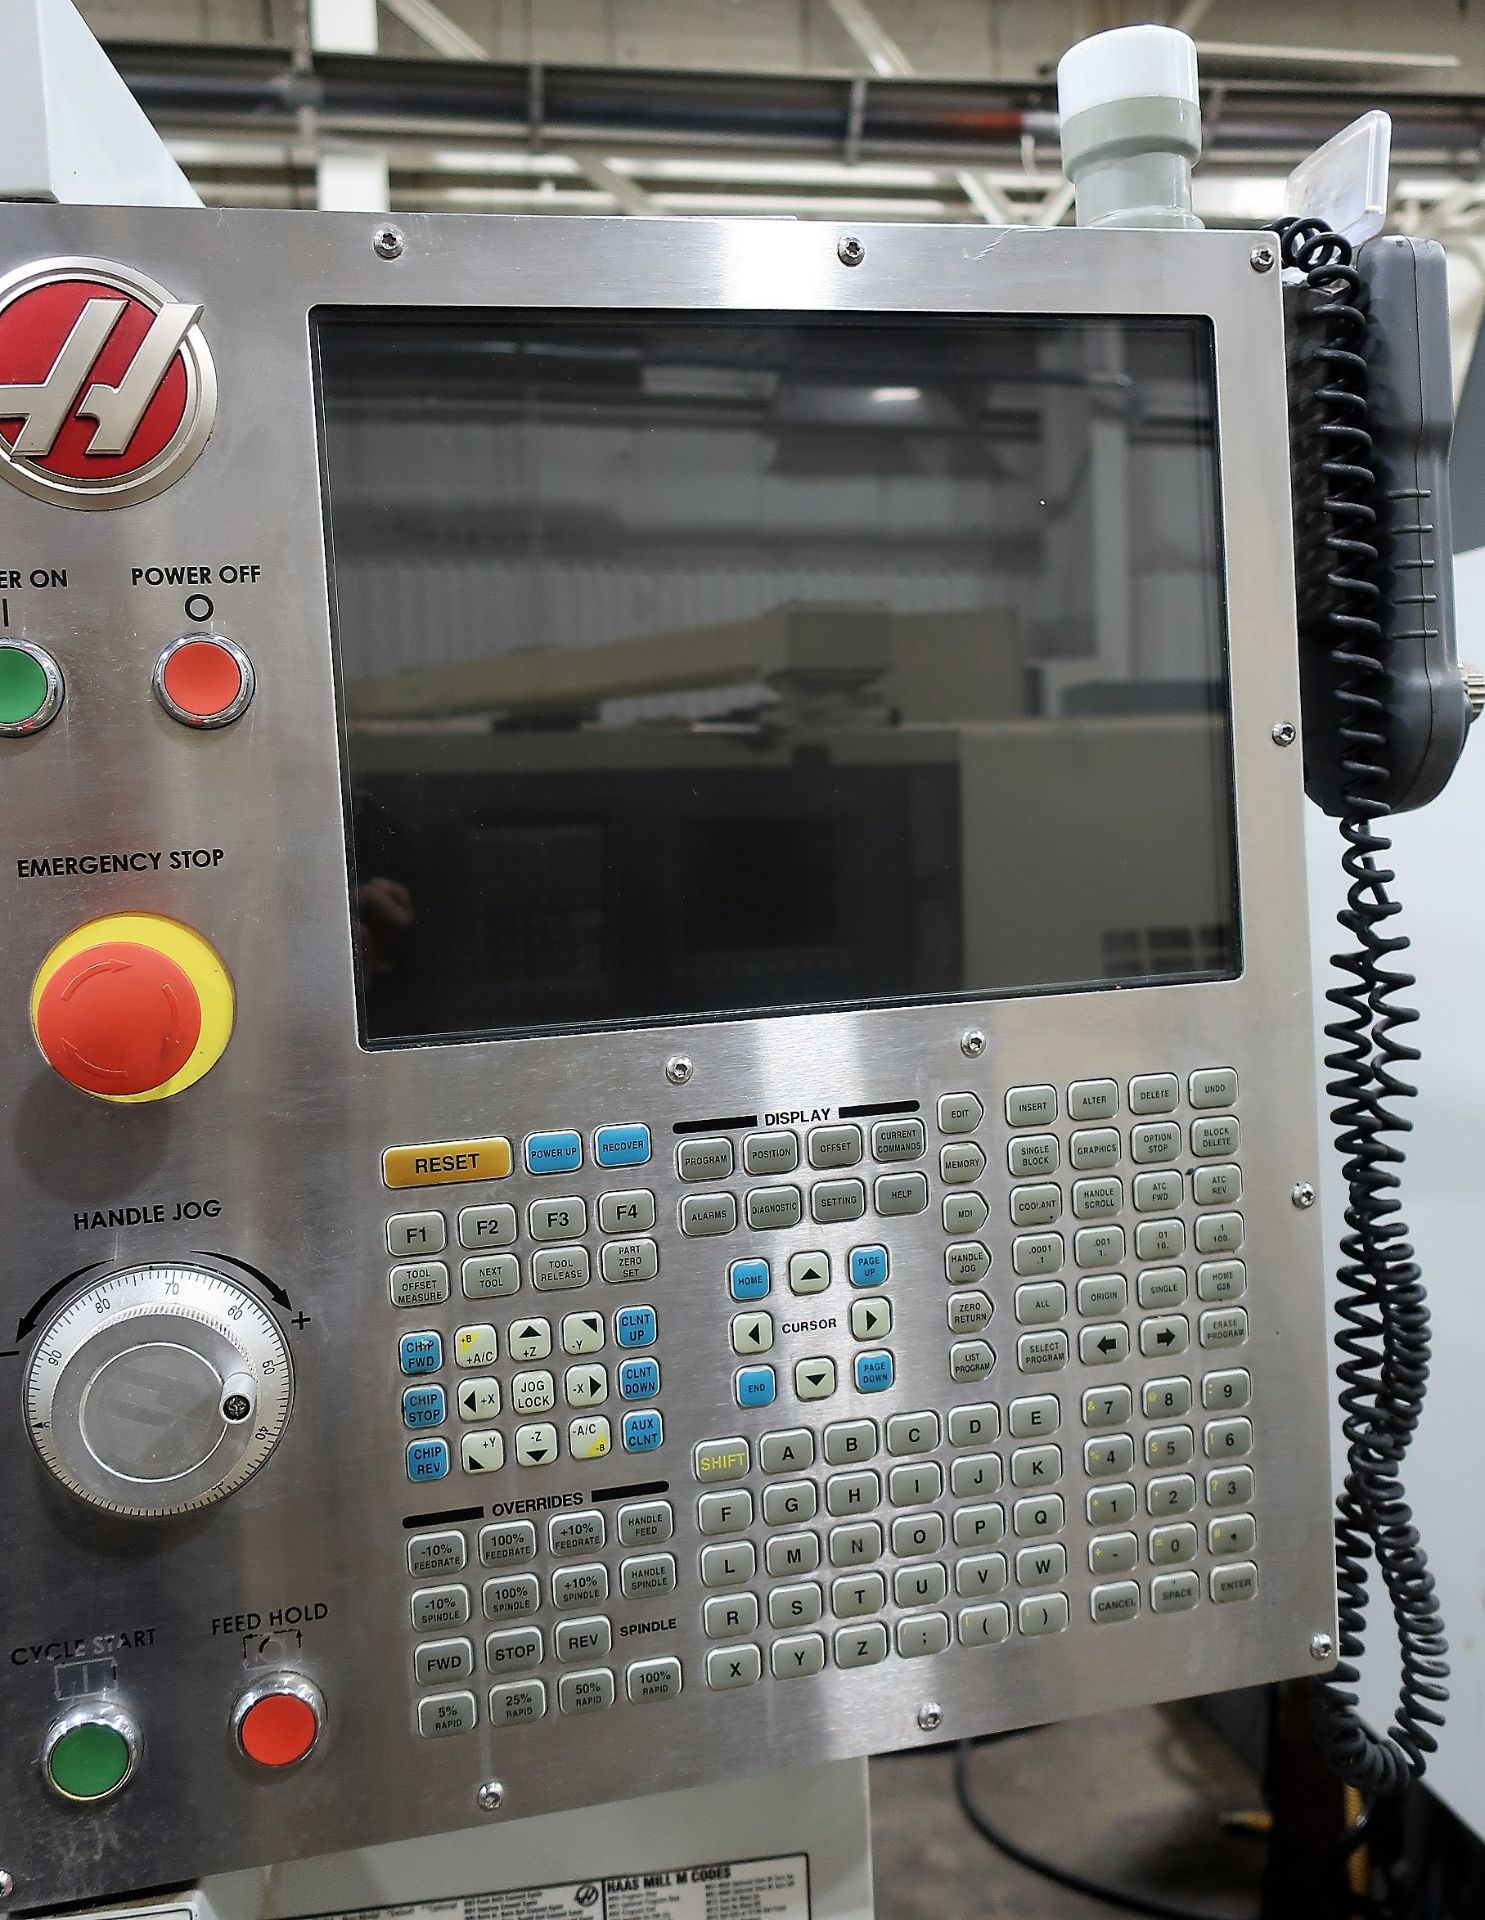 HAAS DT-1 4 AXIS CNC DRILL/TAP VERTICAL MACHINING CENTER, S/N 1132186, NEW 2016 - Image 2 of 11